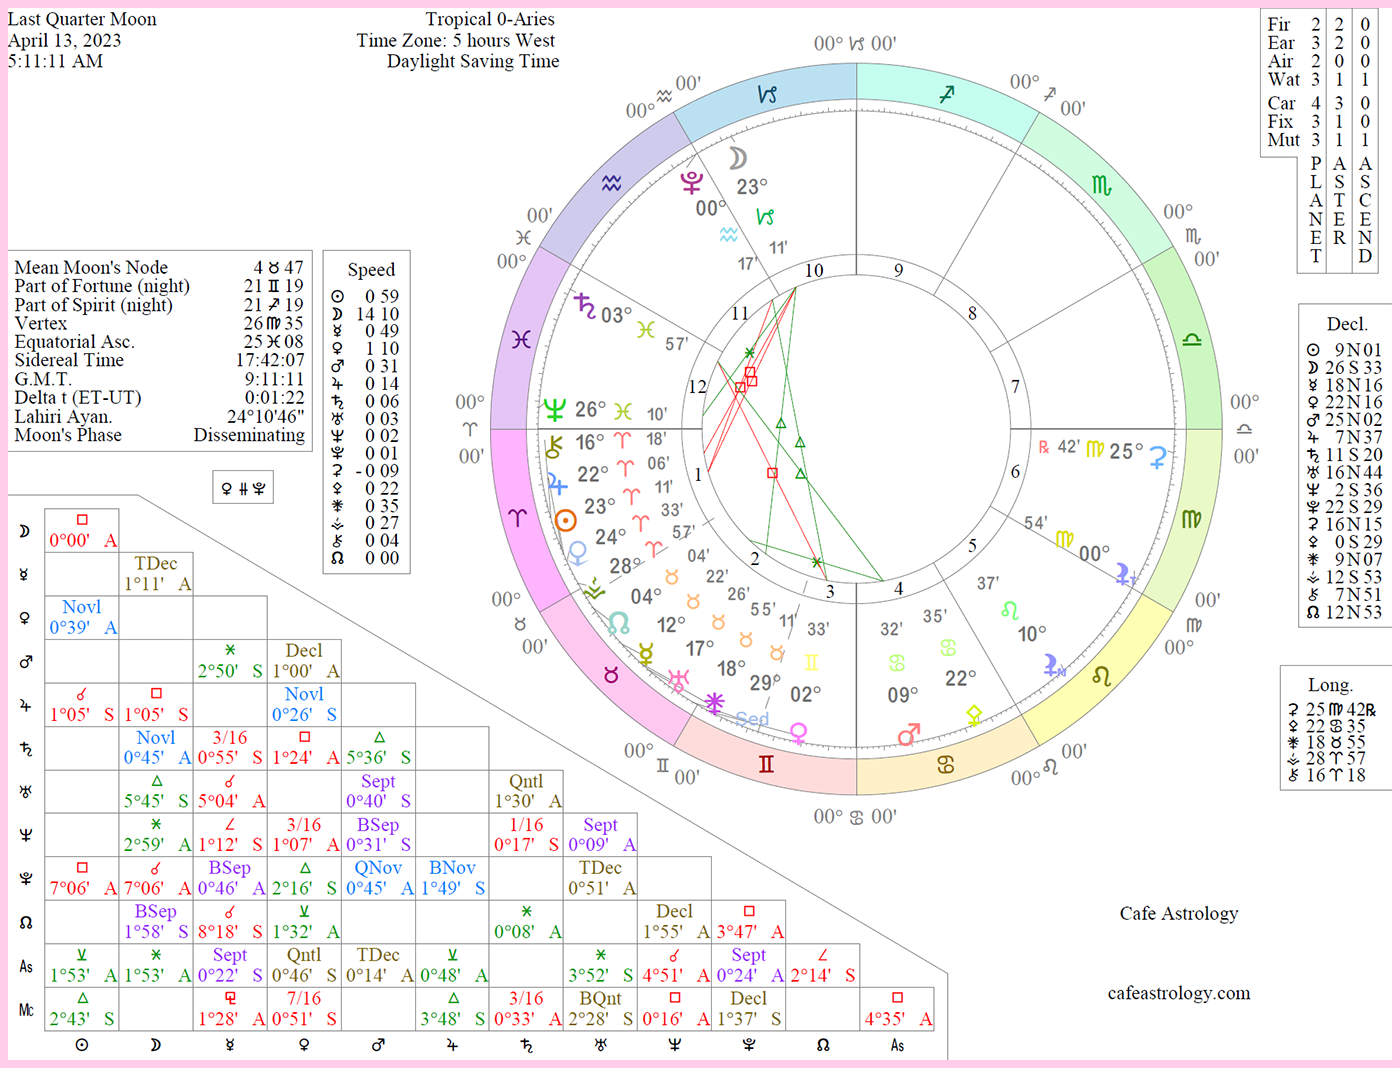 Chart wheel shows the Sun in Aries square the Moon in Capricorn